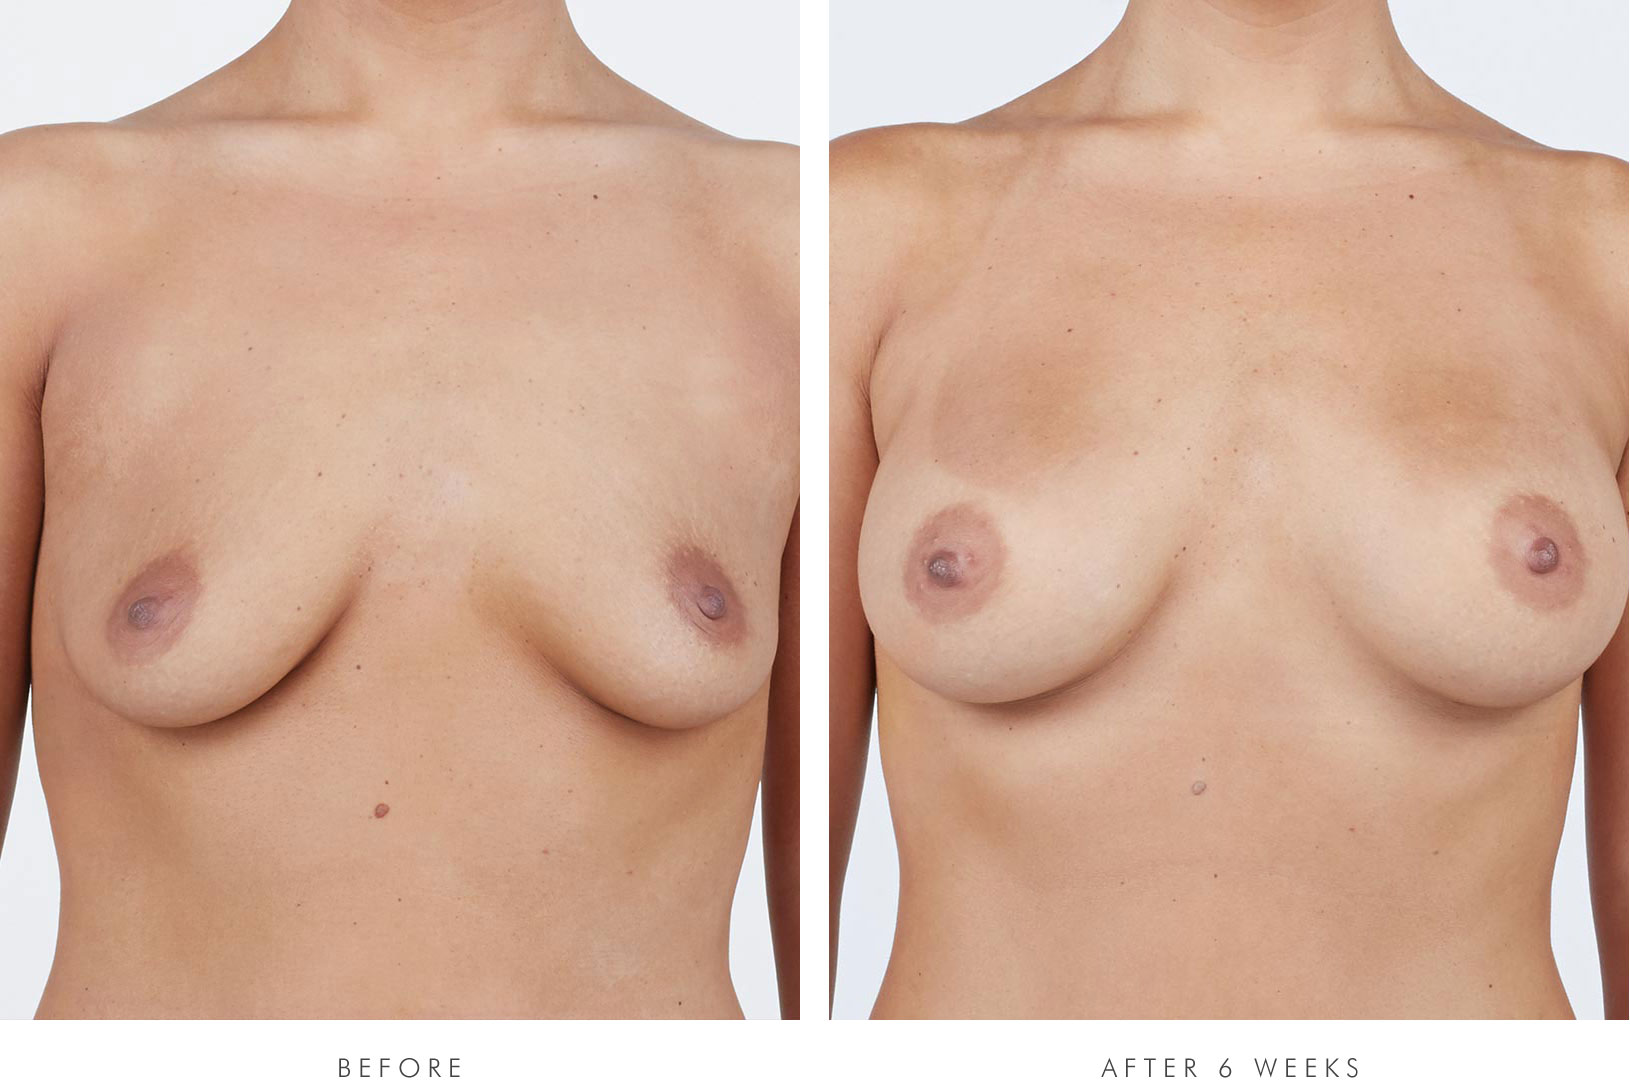 Melissa, front view, before breast augmentation / Melissa, front view, 6 weeks after breast augmentation with NATRELLE® INSPIRA® Style SRM-310 breast implants